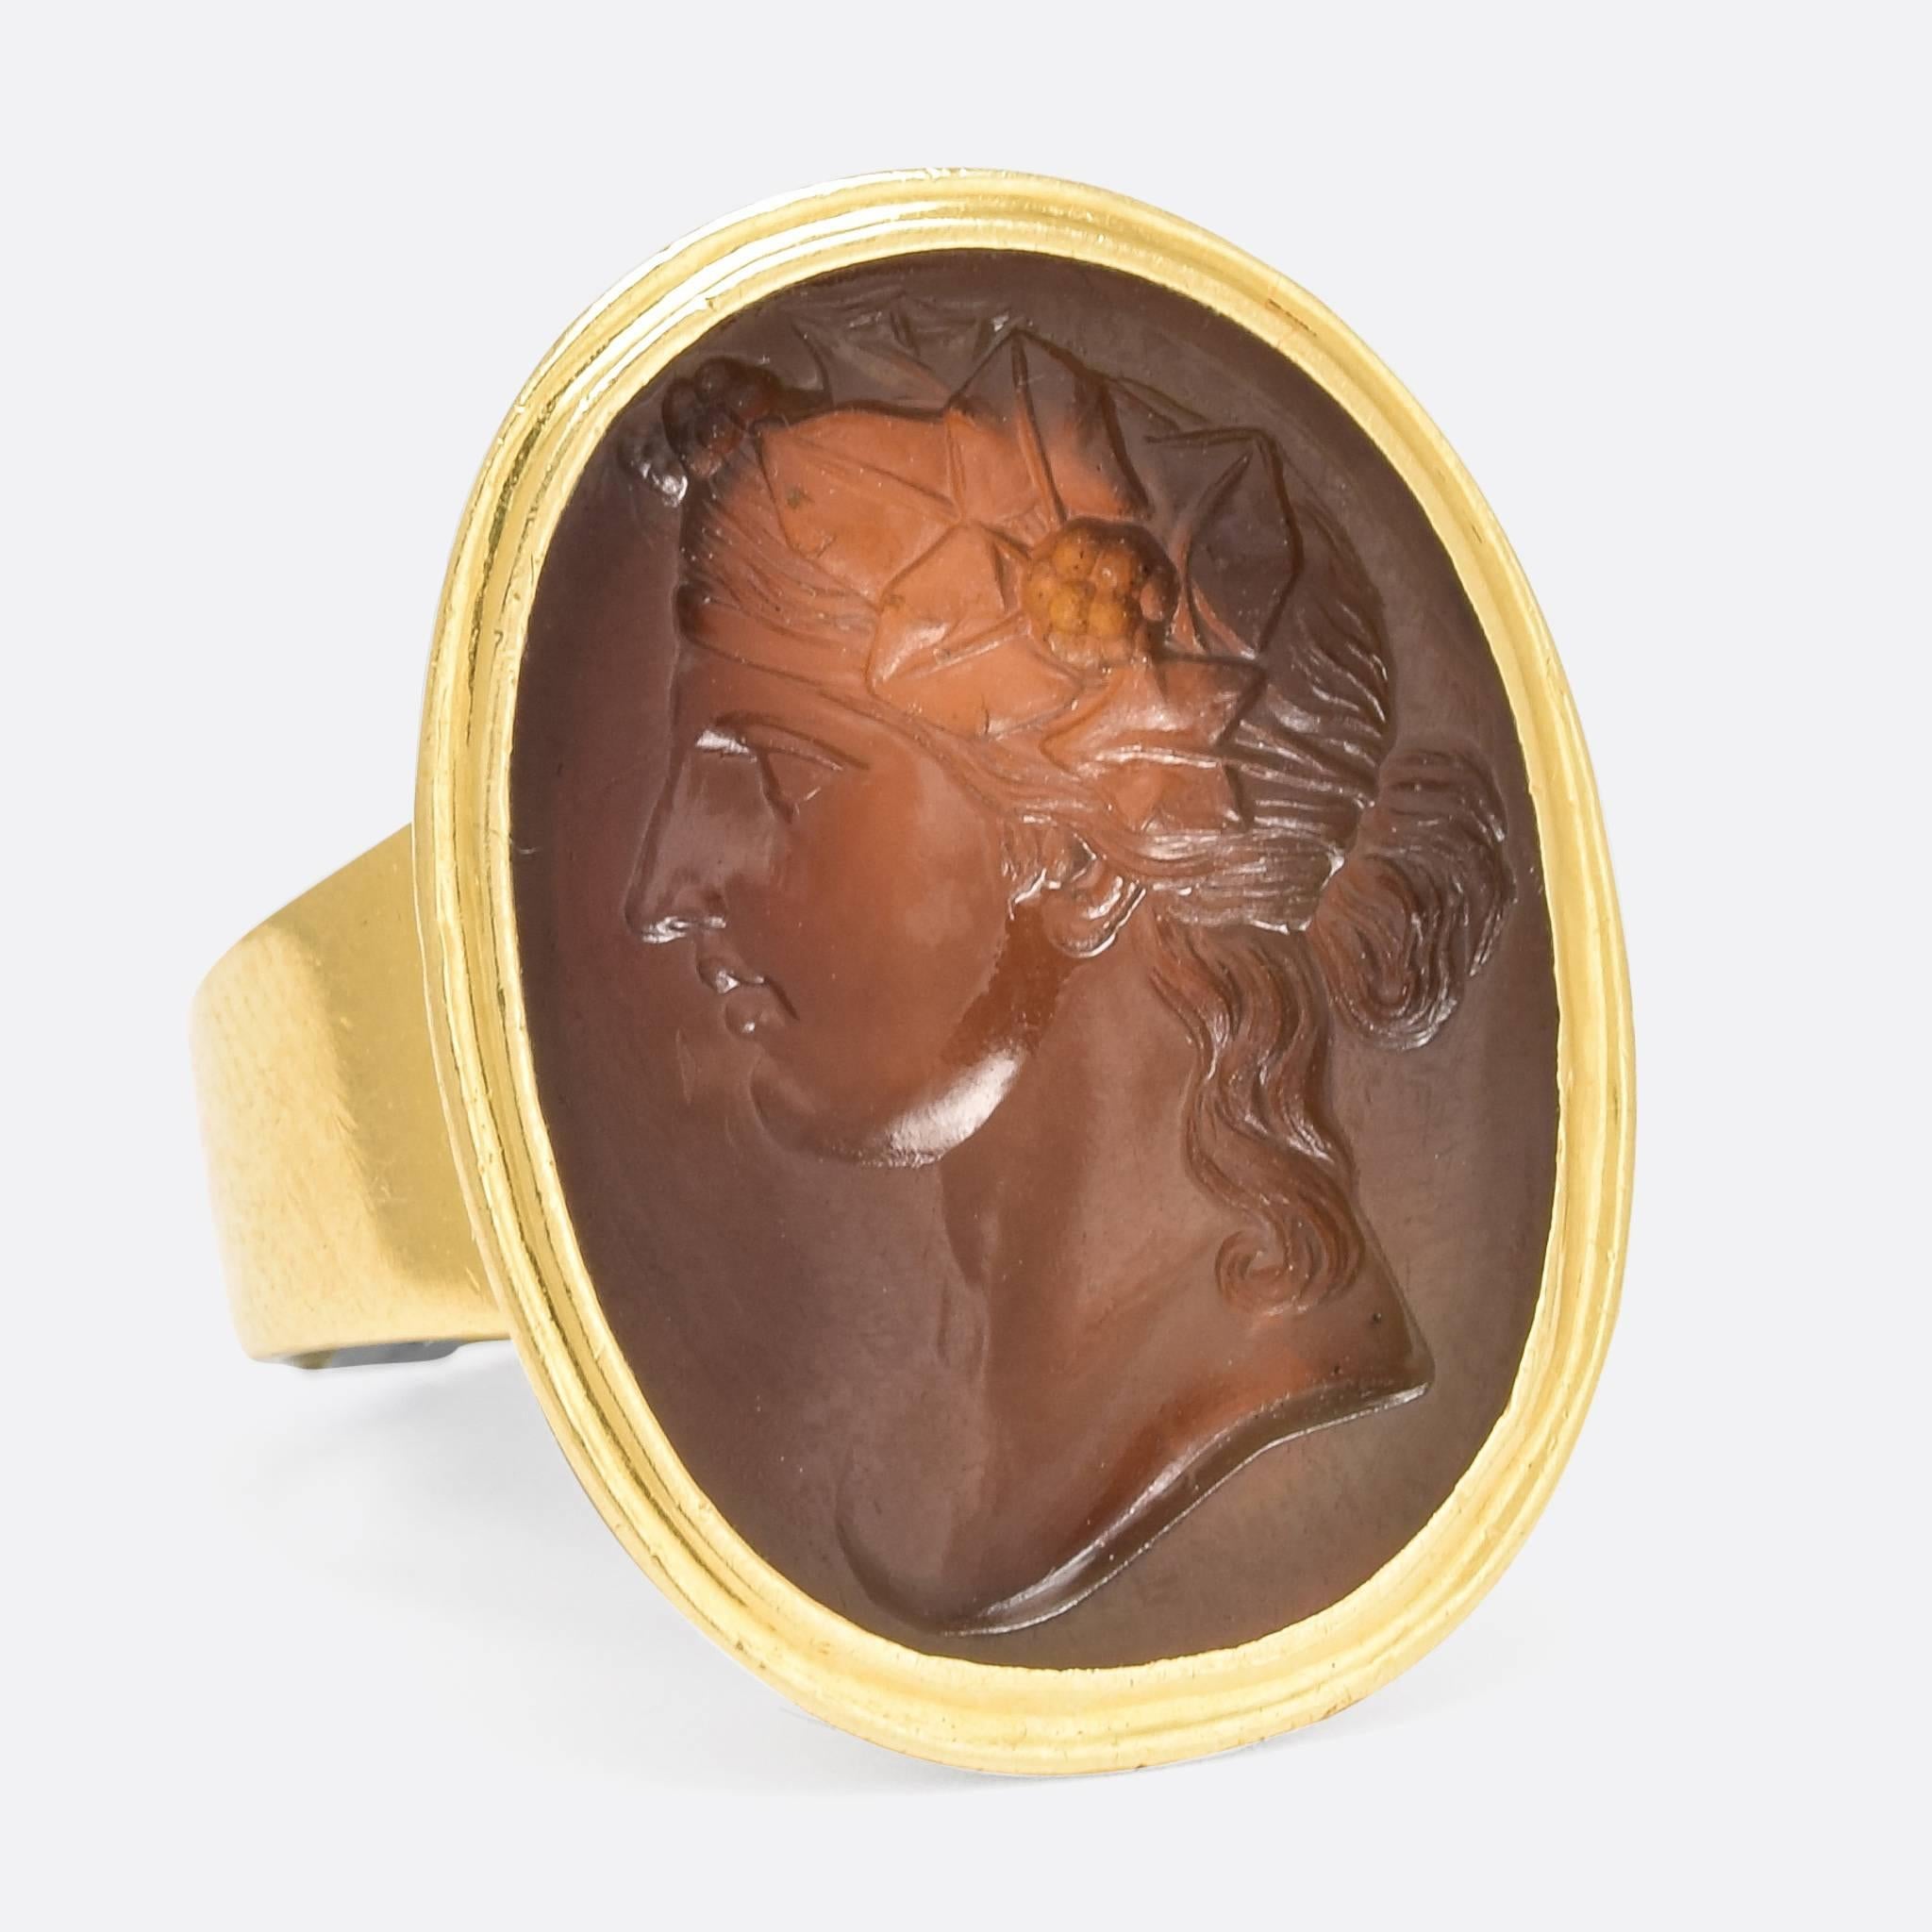 This glorious oversized signet ring is set with an agate panel, carved with an intaglio of Flora - the Roman Goddess of Spring and Flowers. The detail is exquisite, and, rather magically, the 